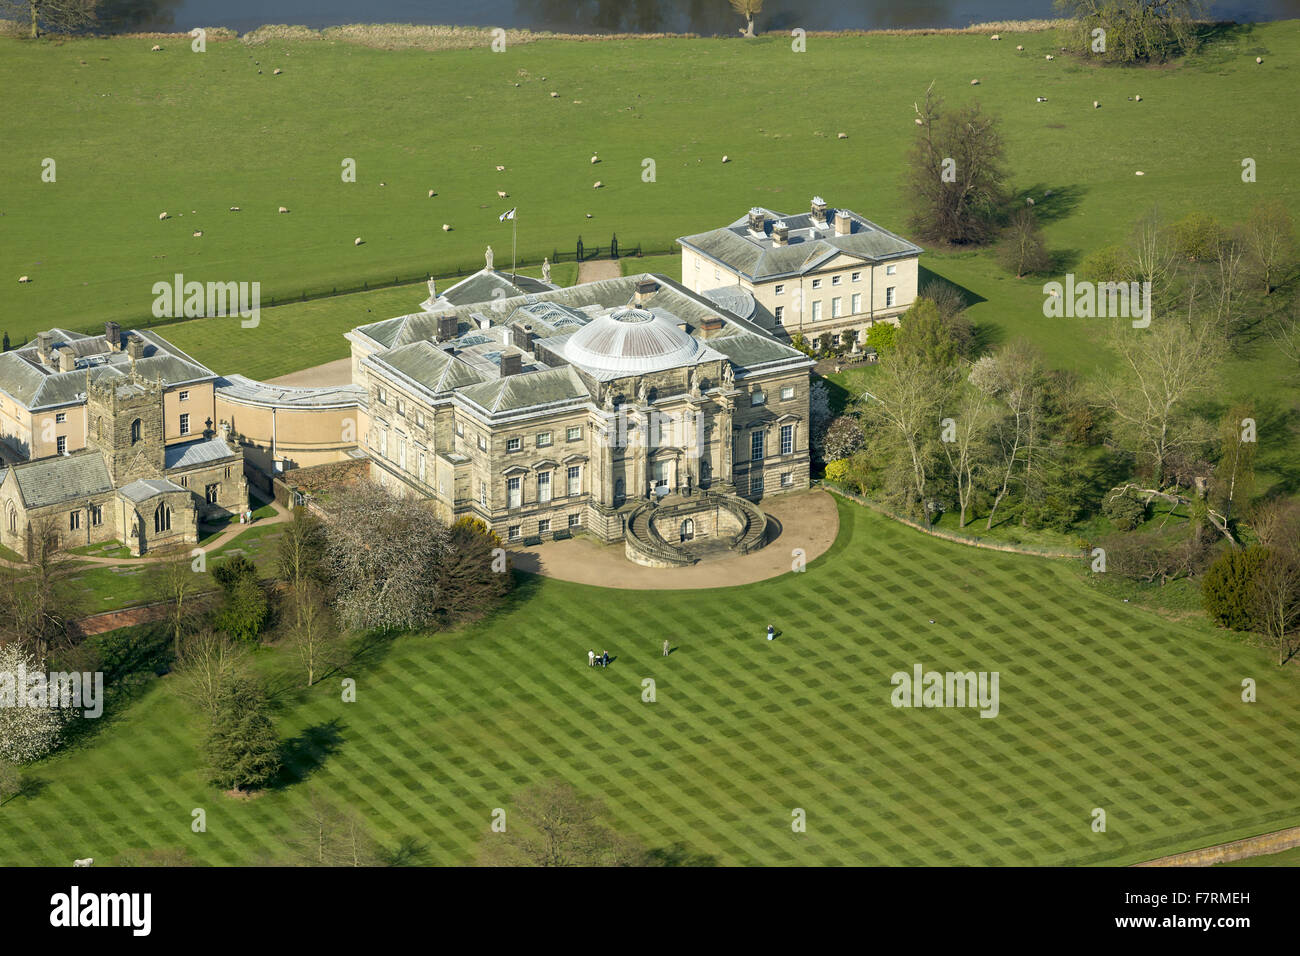 An aerial view of Kedleston Hall, Derbyshire. Kedleston is one of the grandest and most perfectly finished houses designed by architect Robert Adam. Stock Photo